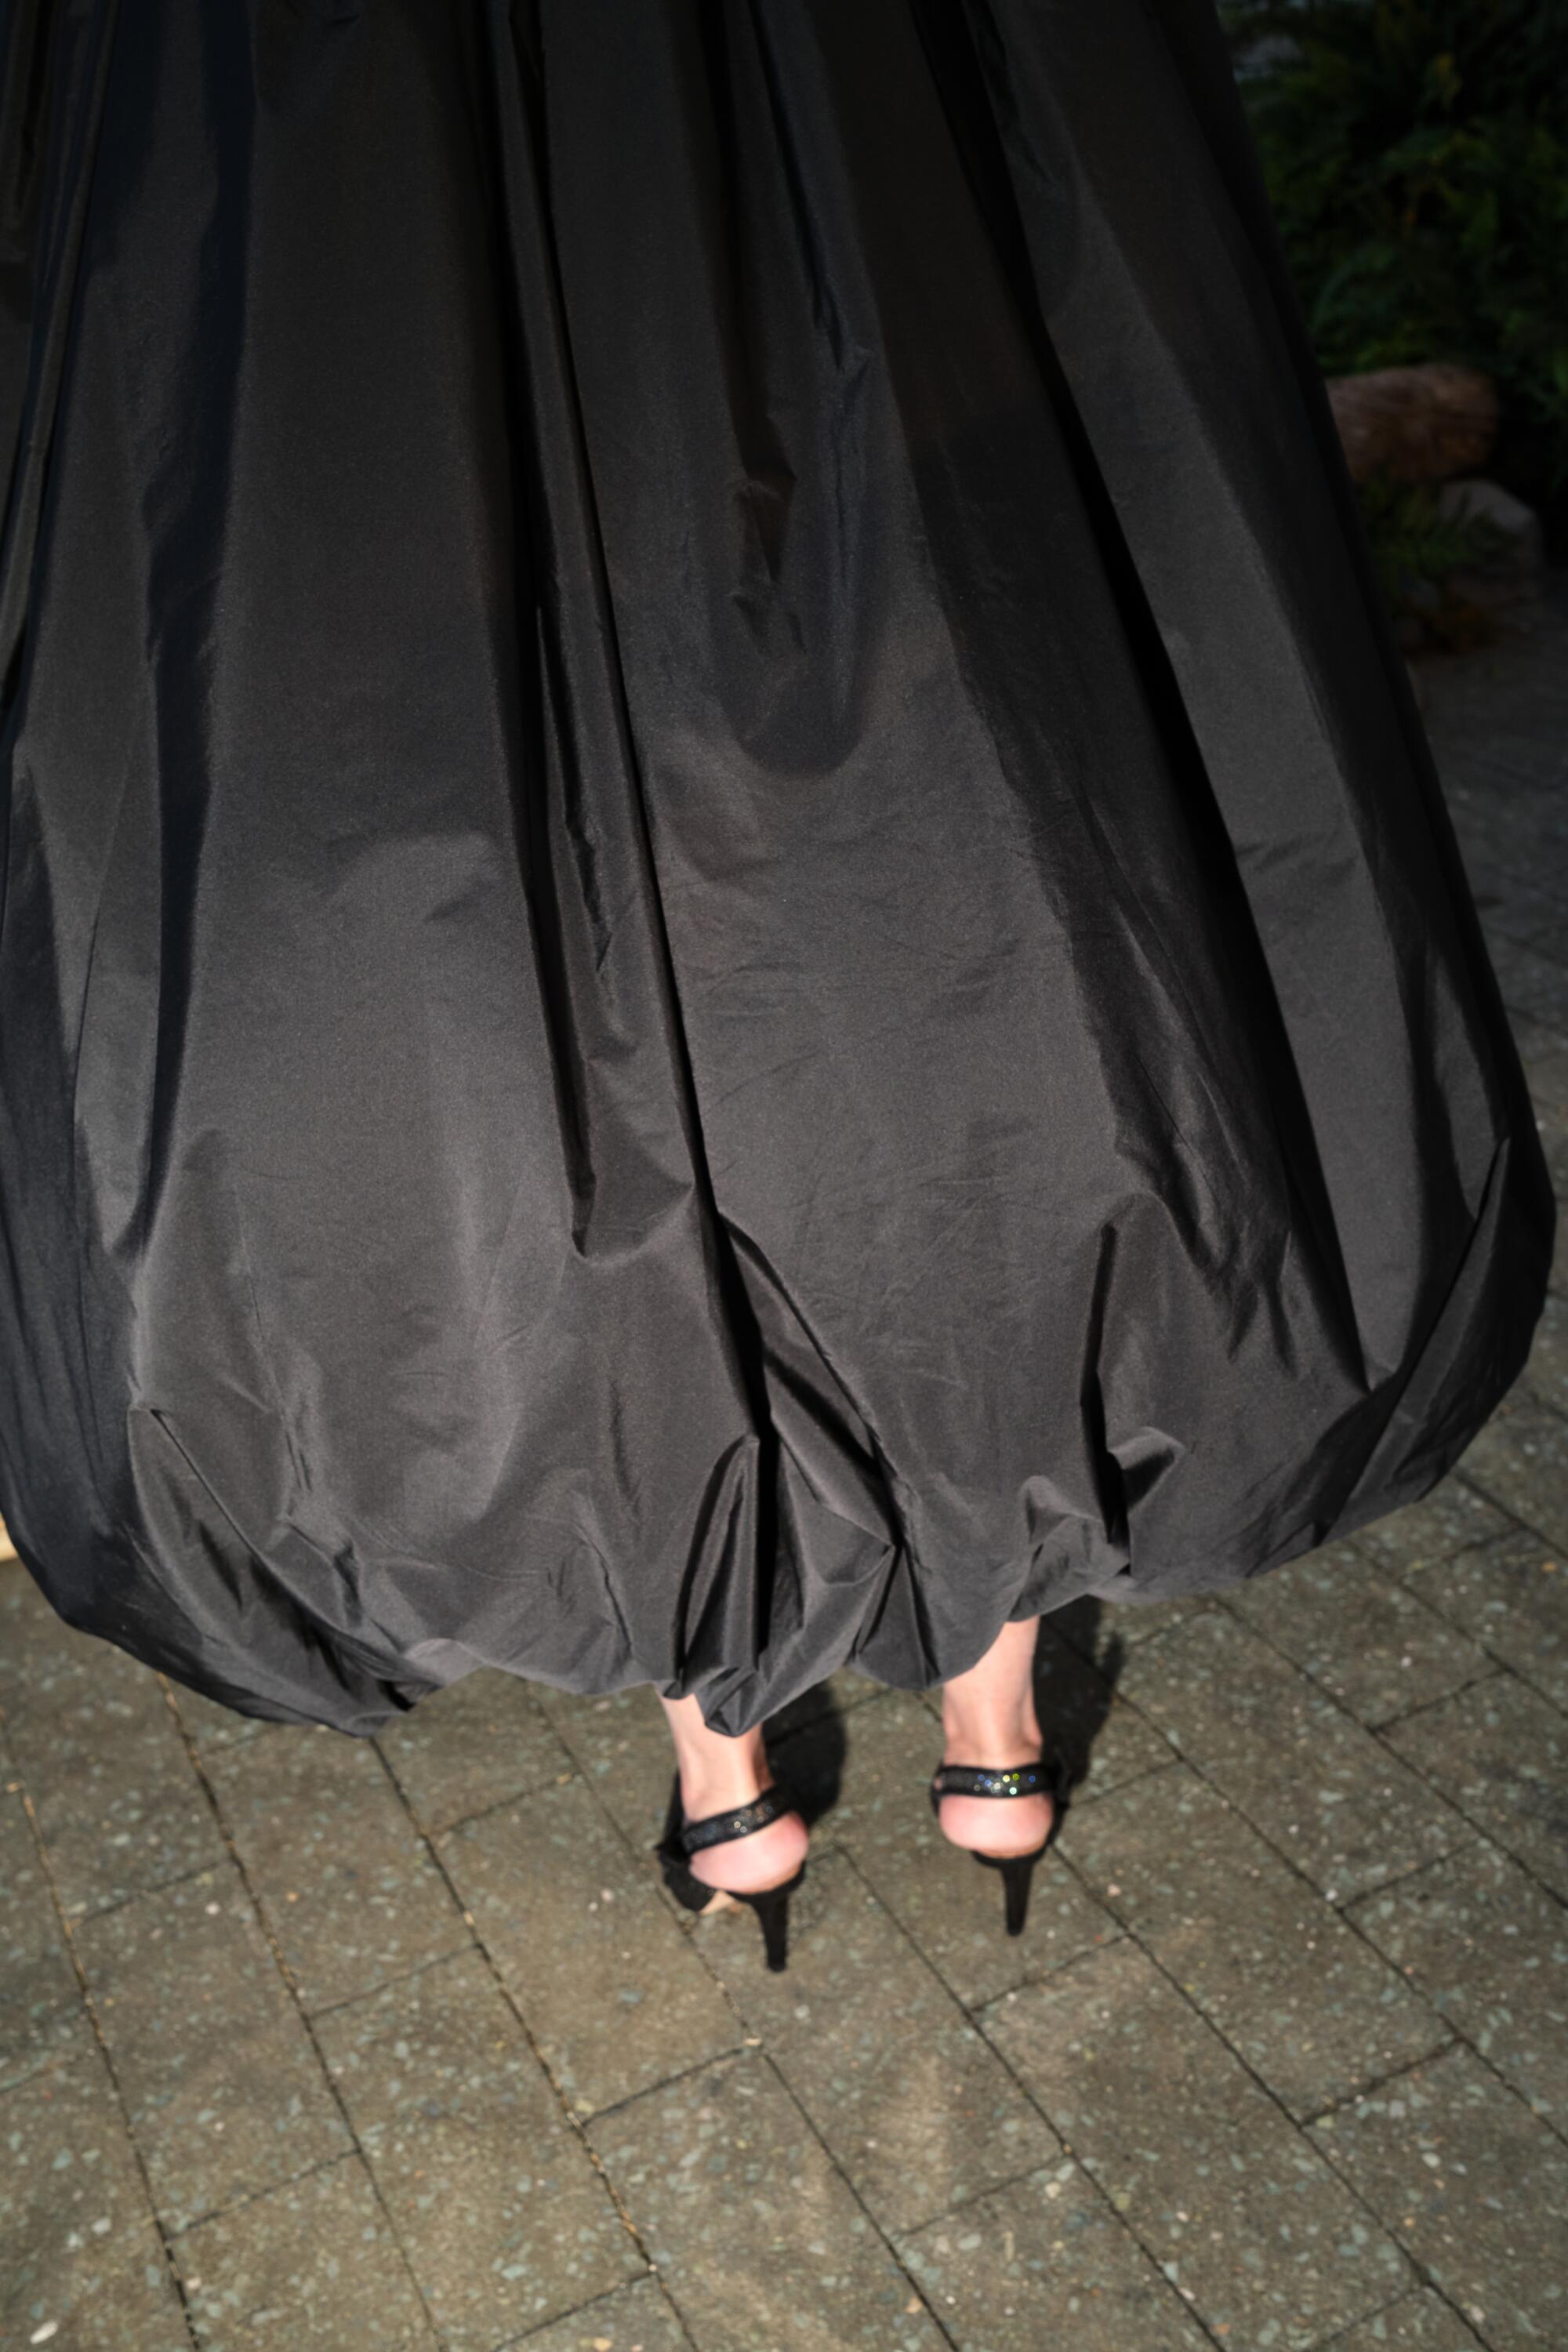 A black gown and shoes.